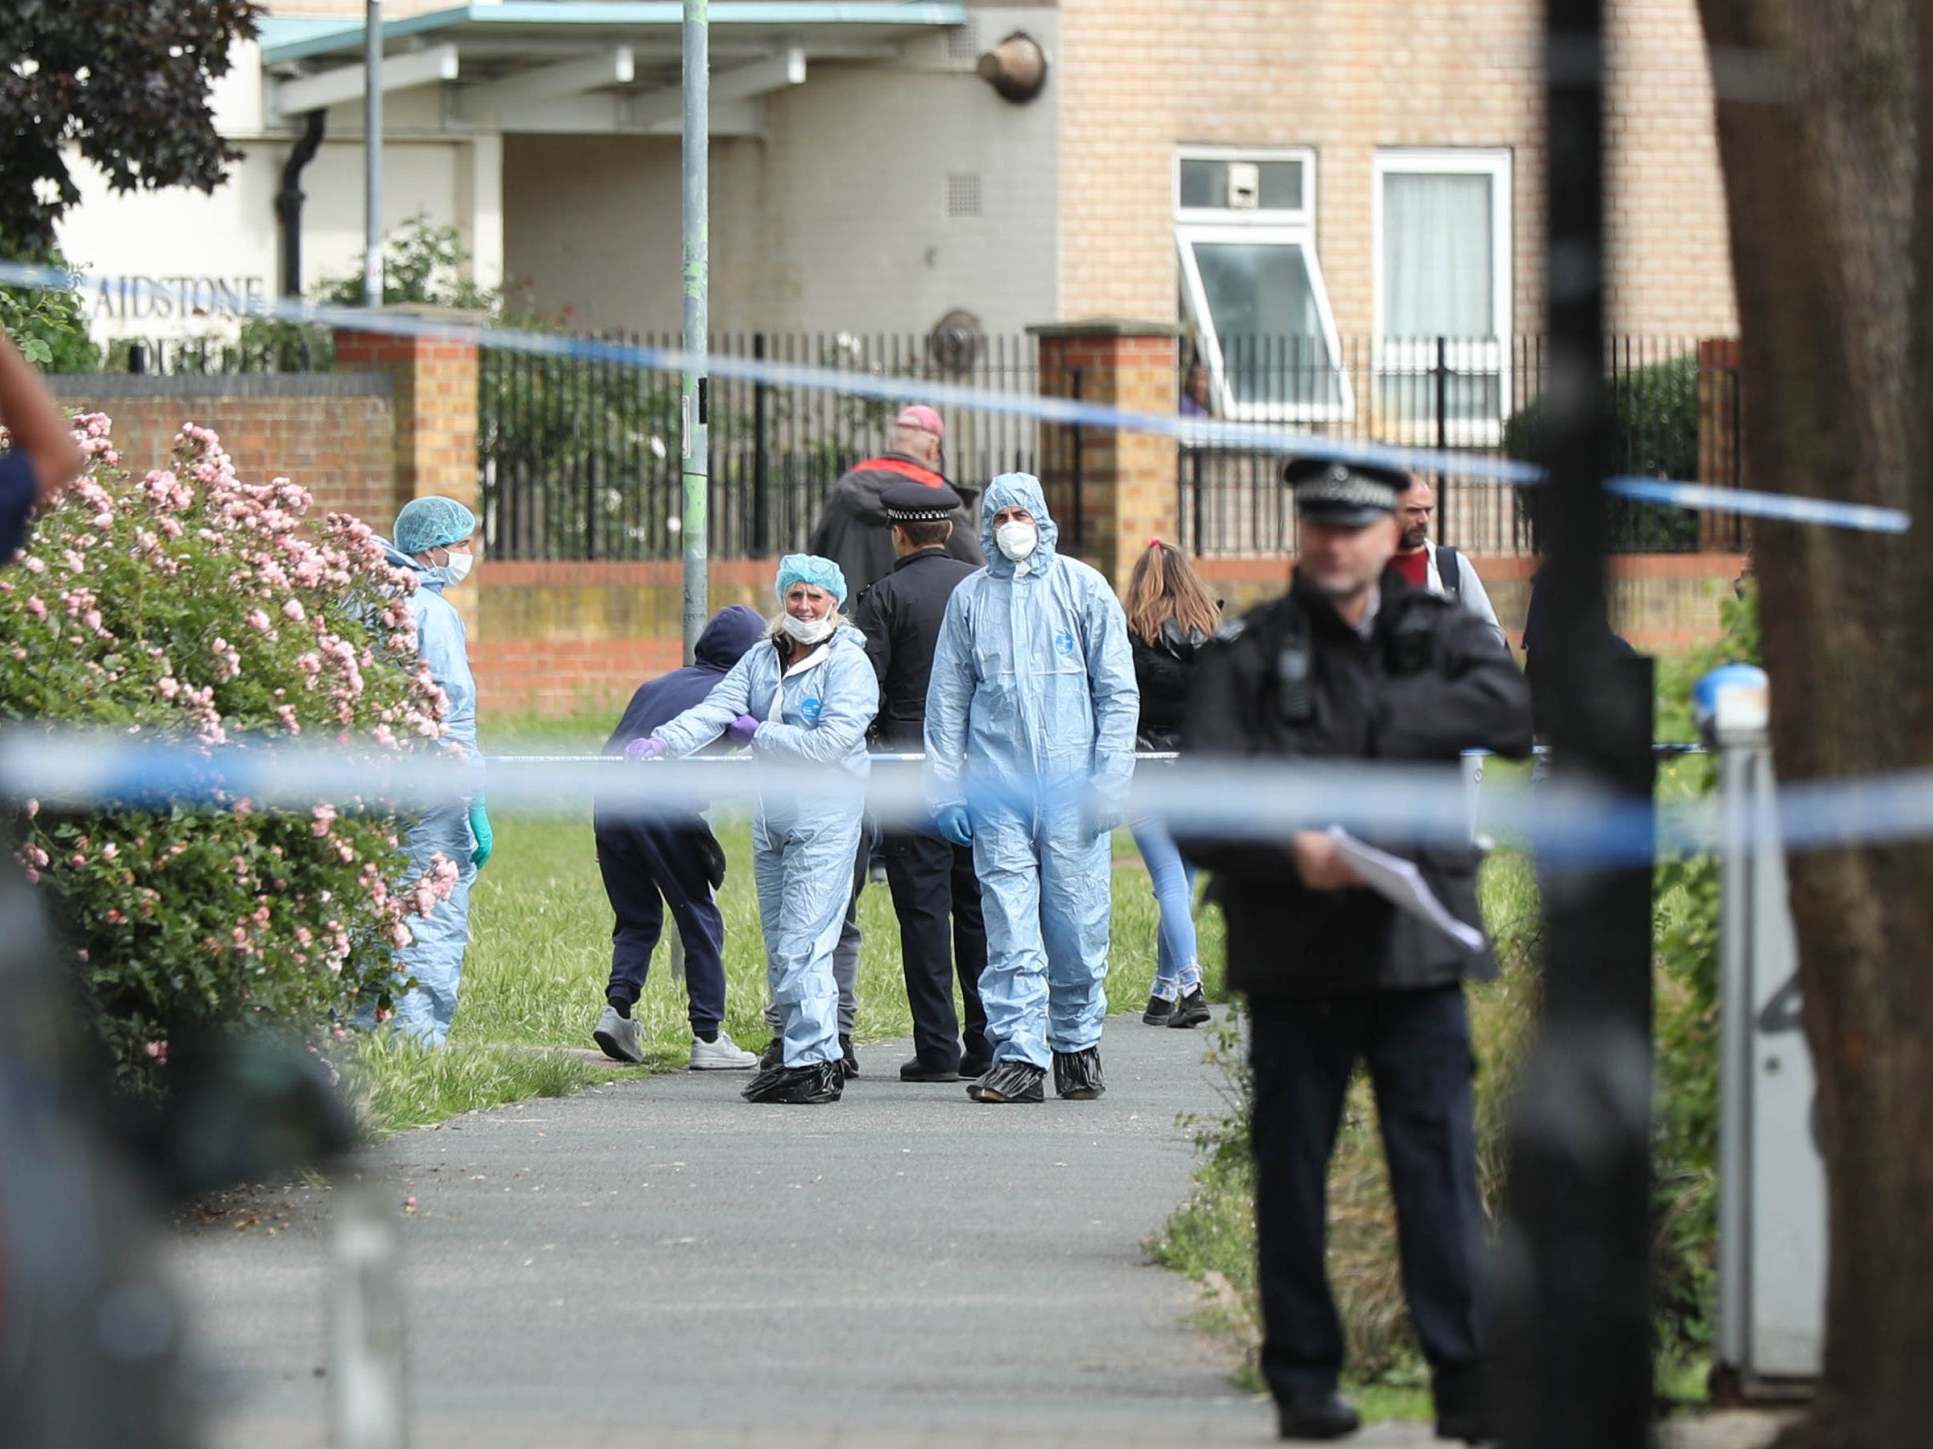 Police and forensics officers at the scene of a stabbing in east London